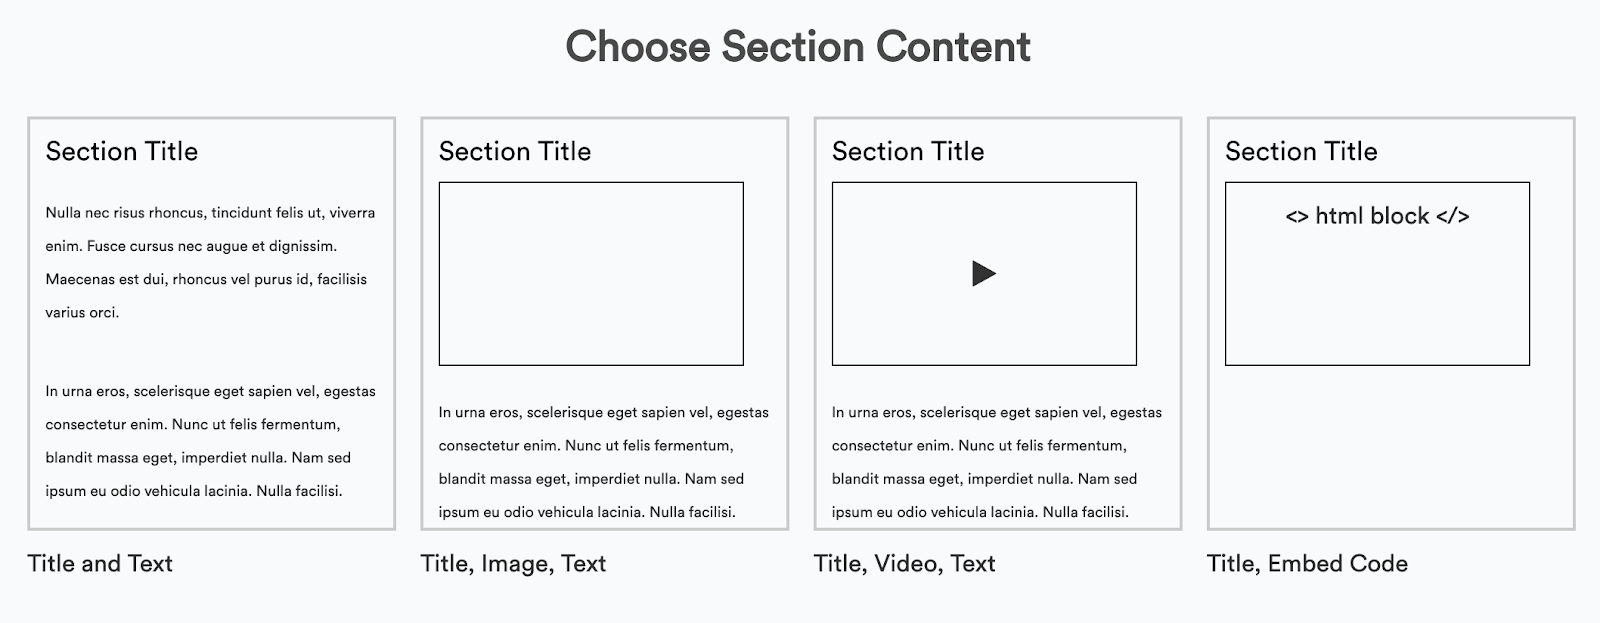 A modal with the following options from left to right: title and text, title image, text, title video text, and title embed code 